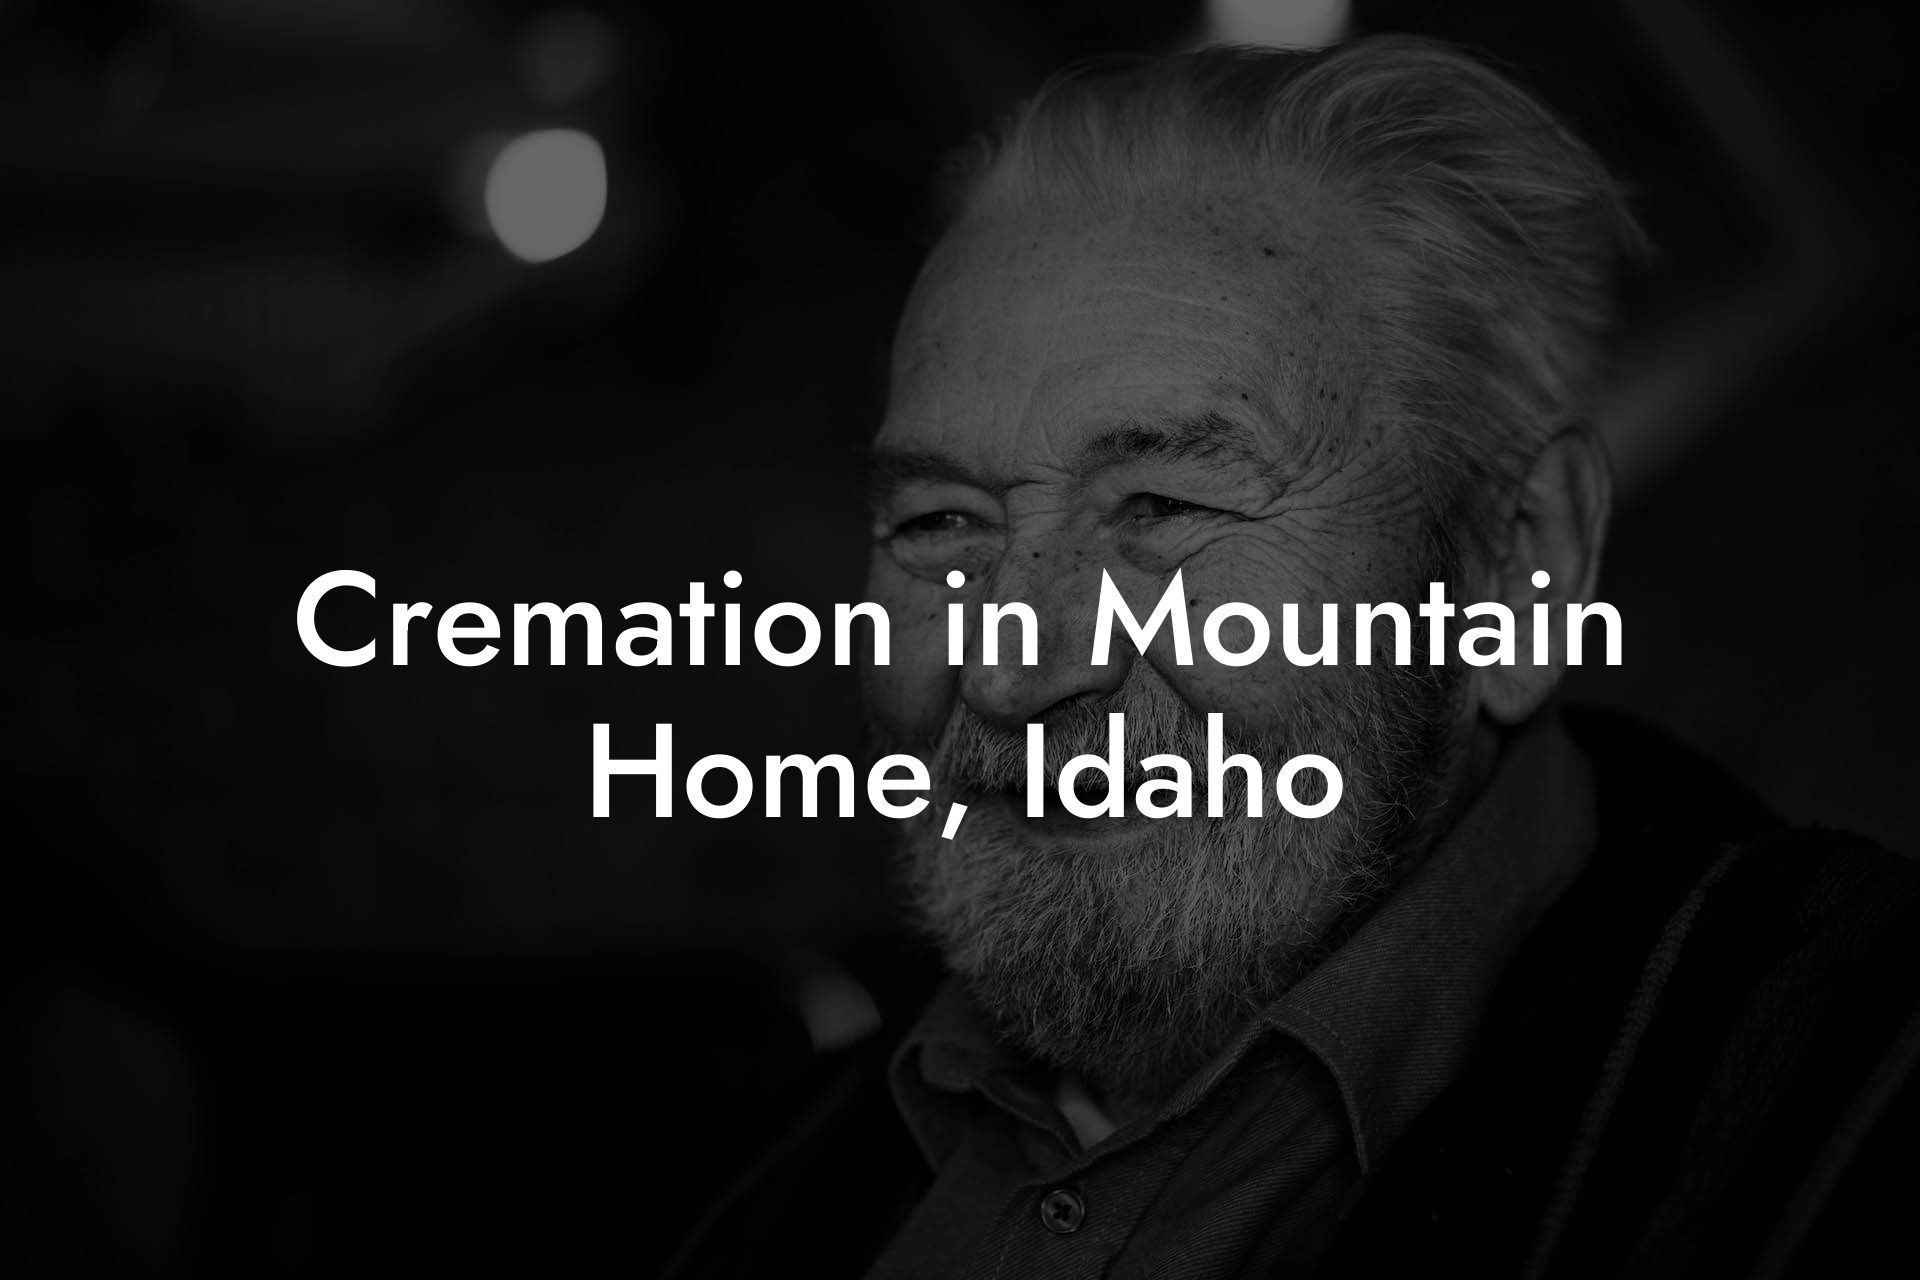 Cremation in Mountain Home, Idaho